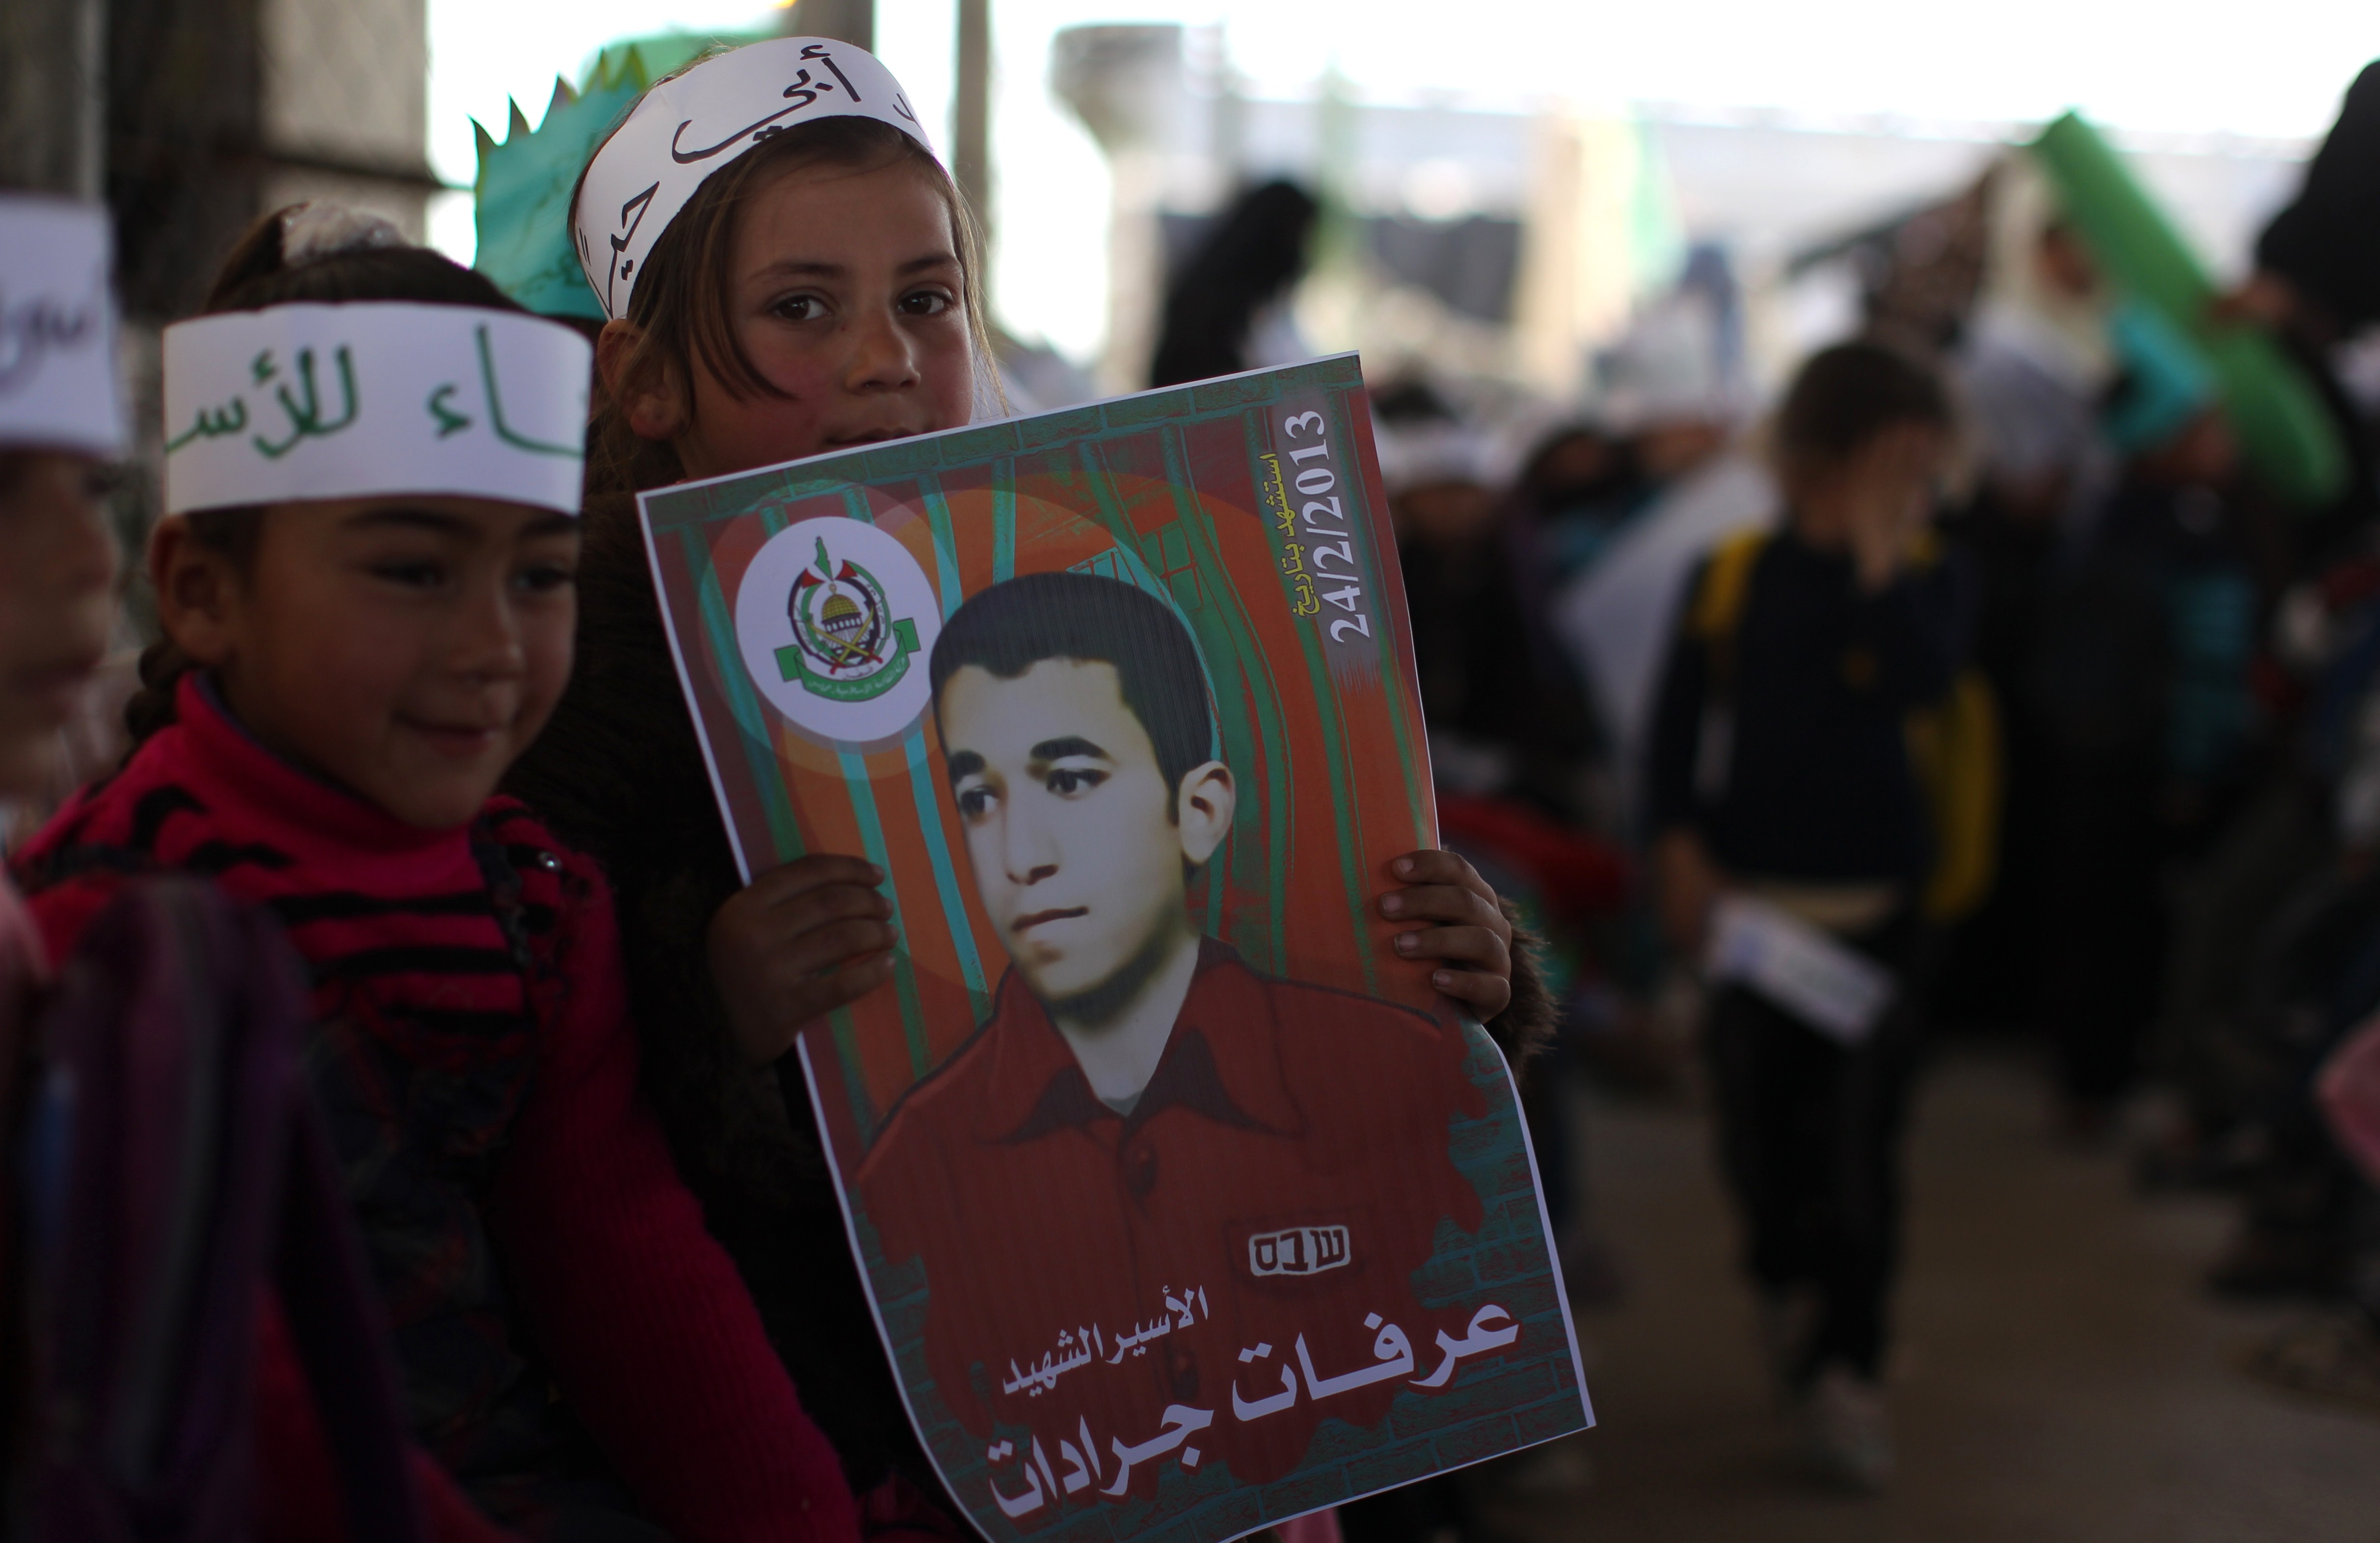 A Palestinian girl carries a poster of Arafat Jaradat, who died in an Israeli prison, during a protest at Erez border crossing between Israel and the northern Gaza Strip on (AFP Photo)